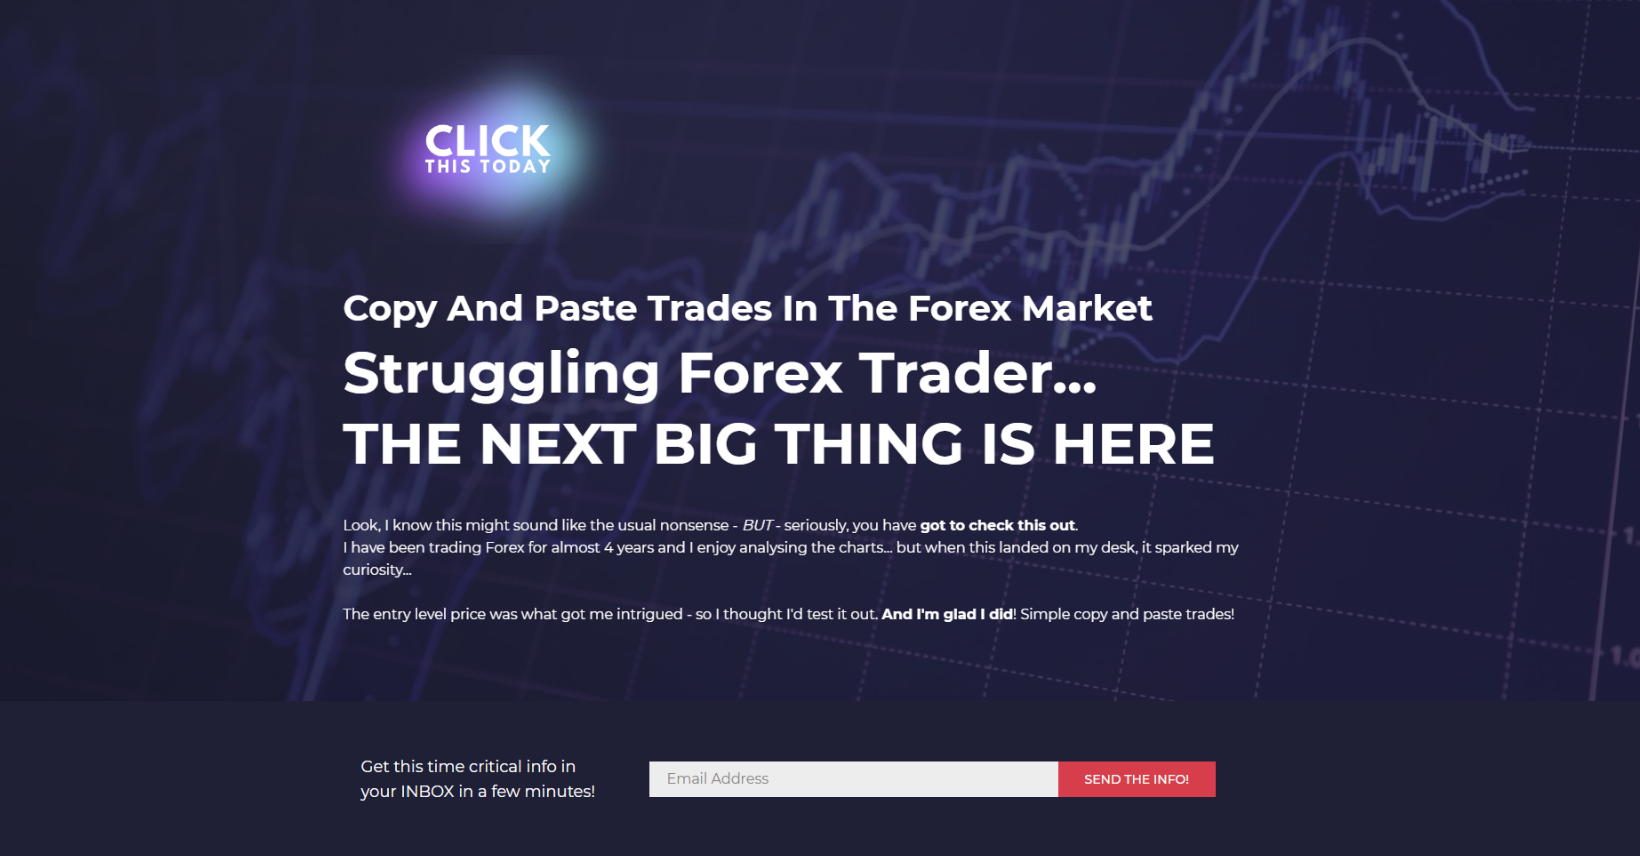 Copy and paste trades free forex